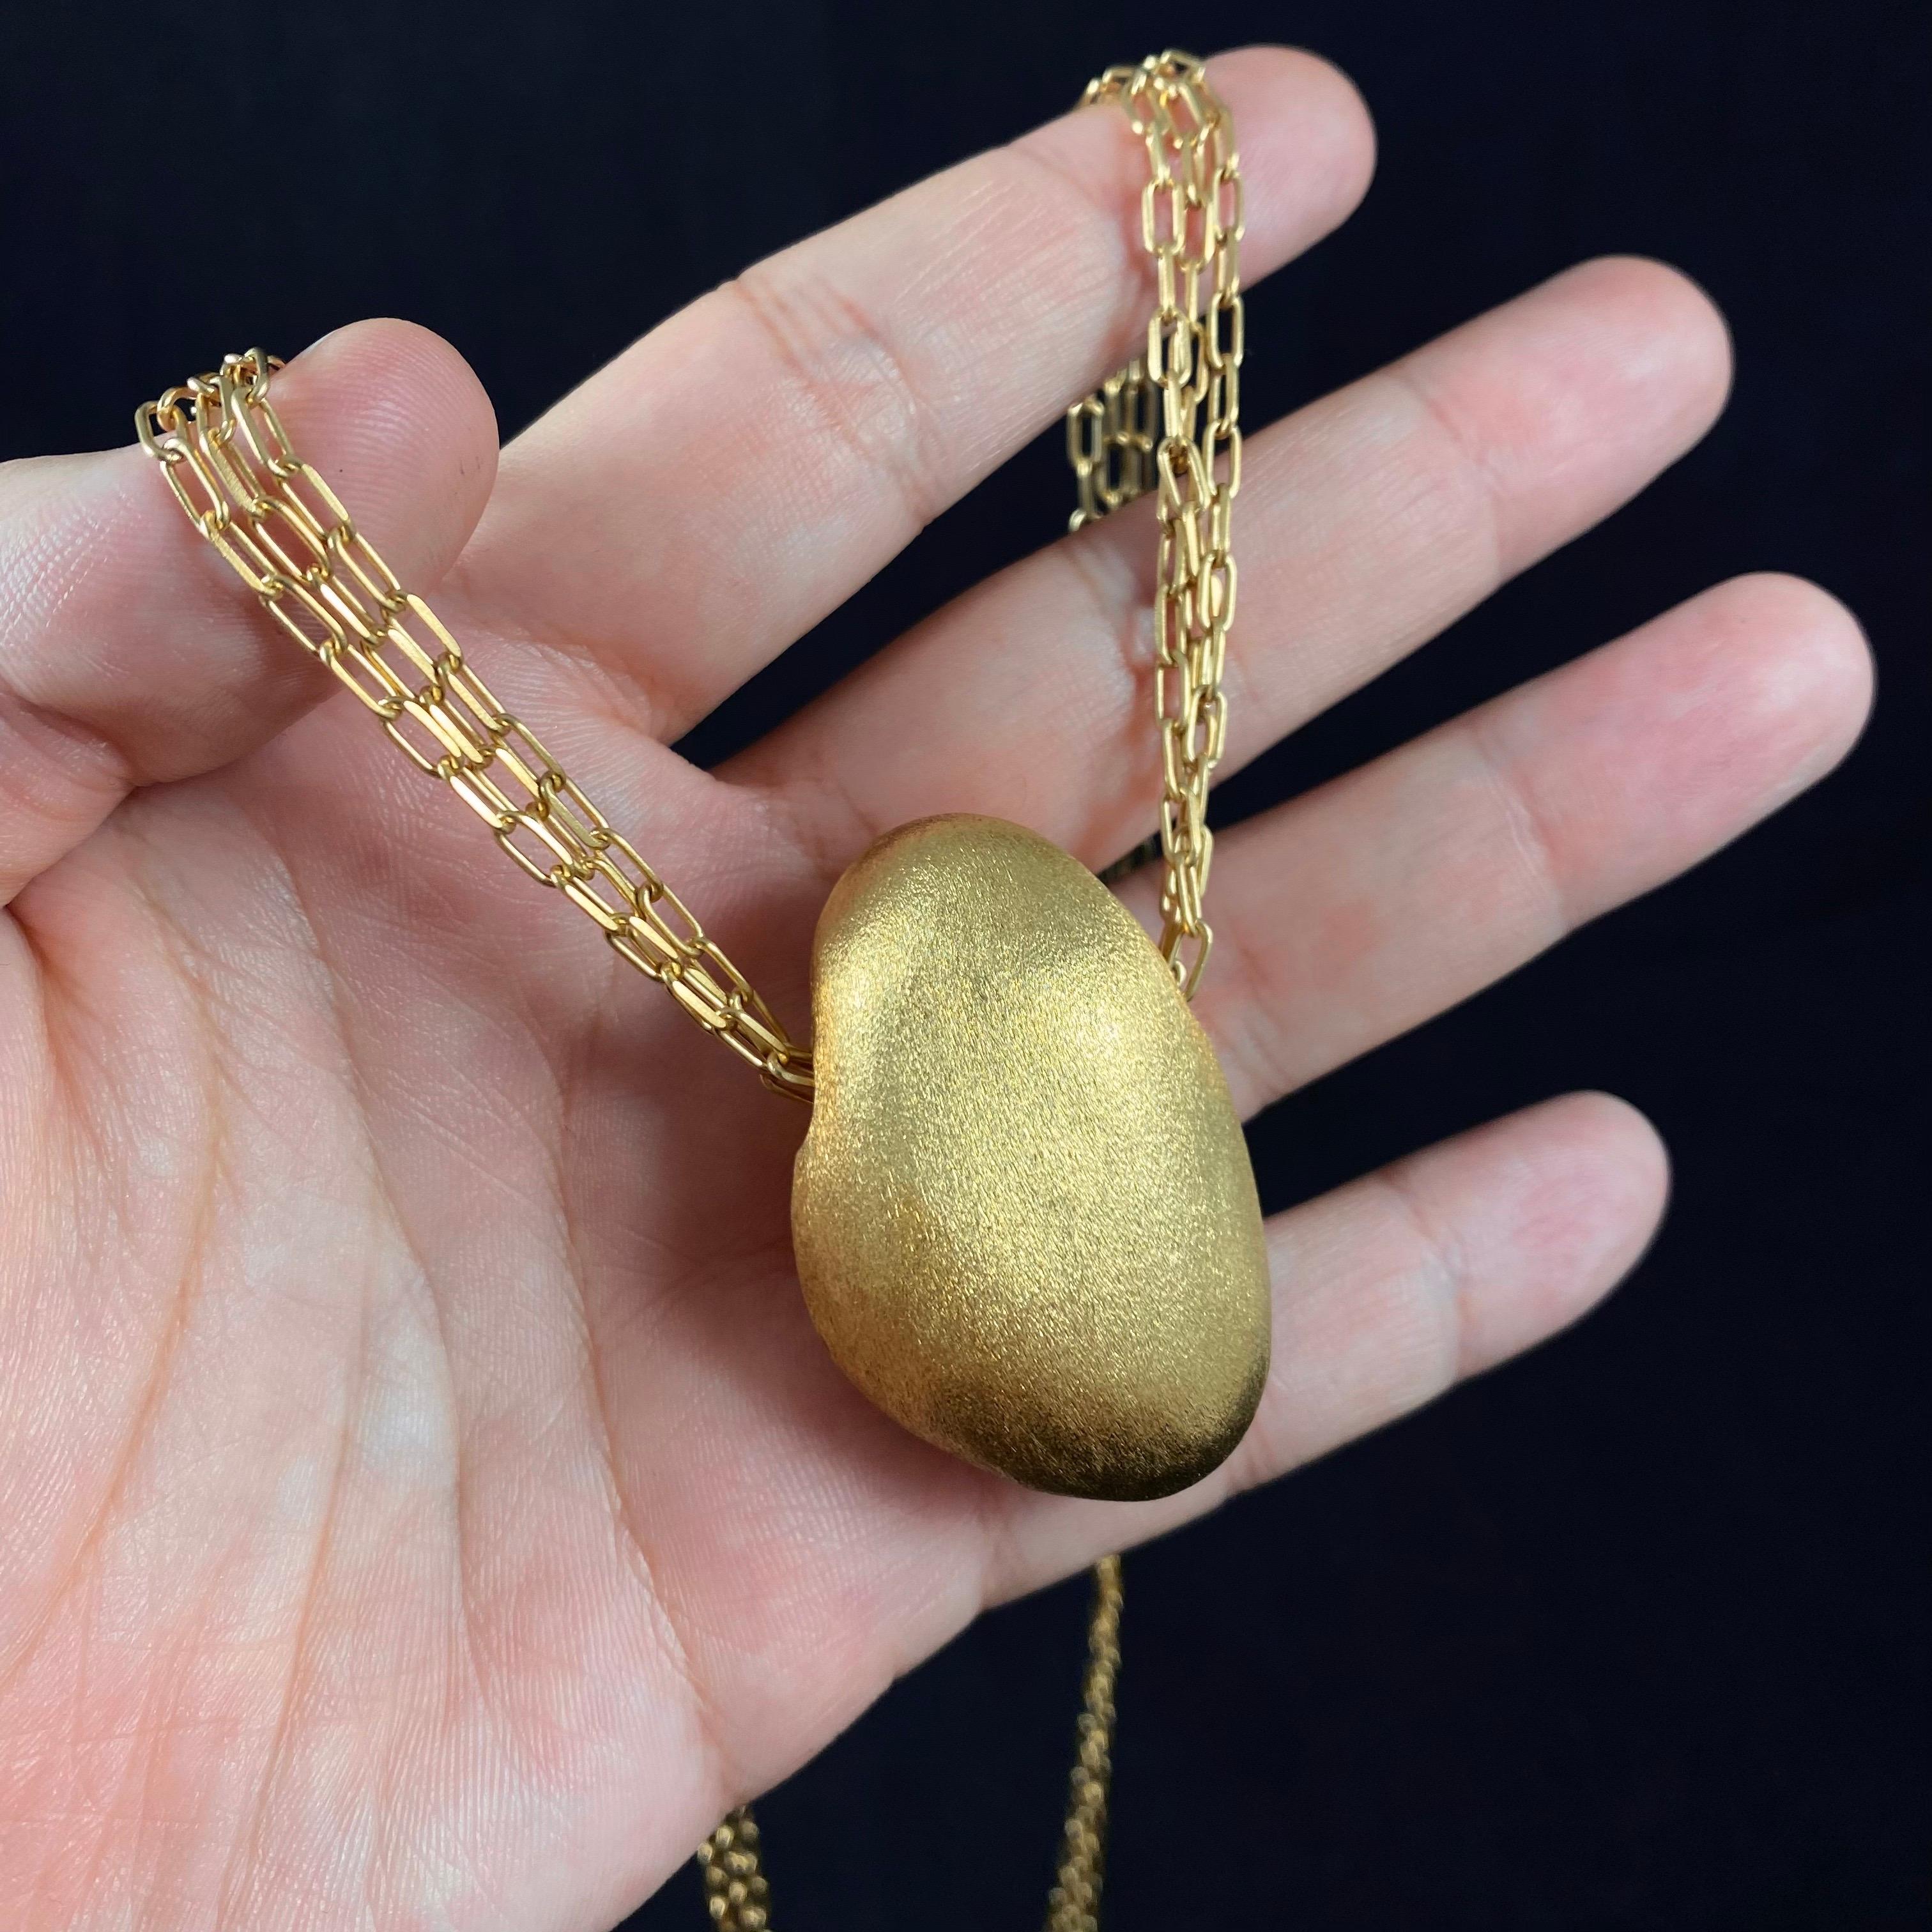 H. Stern Textured Golden Stone Pedras Roladas Maior Pendant Necklace Yellow Gold In Good Condition For Sale In Lisbon, PT